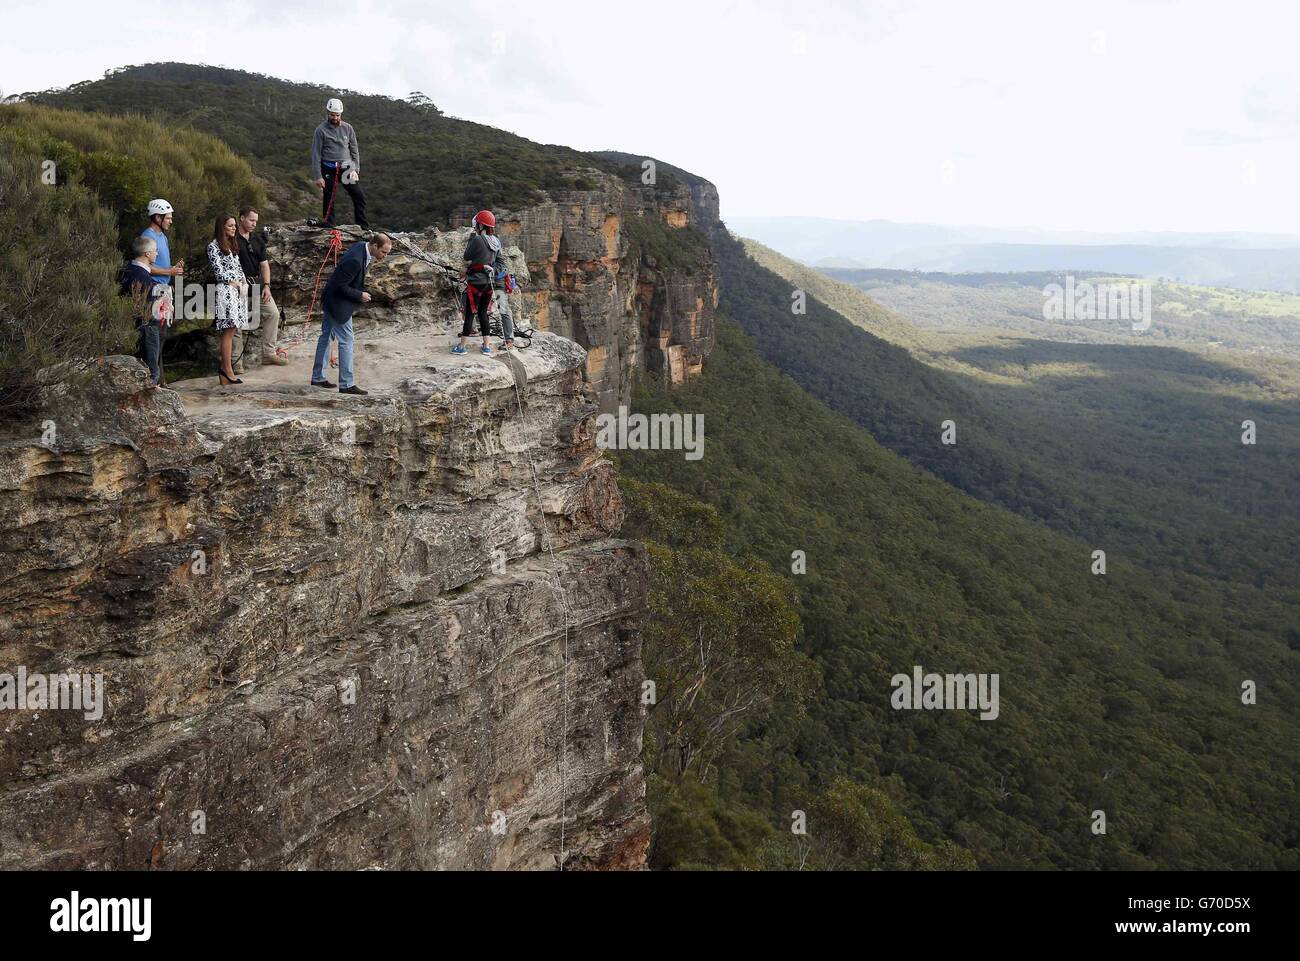 The Duke of Cambridge (centre) looks over the edge of a cliff as he and the Duchess of Cambridge visit the Narrow Neck Lookout and observes abseiling by the Mountain Youth Services group in the Blue Mountains town of Katoomba, west of Sydney. Stock Photo